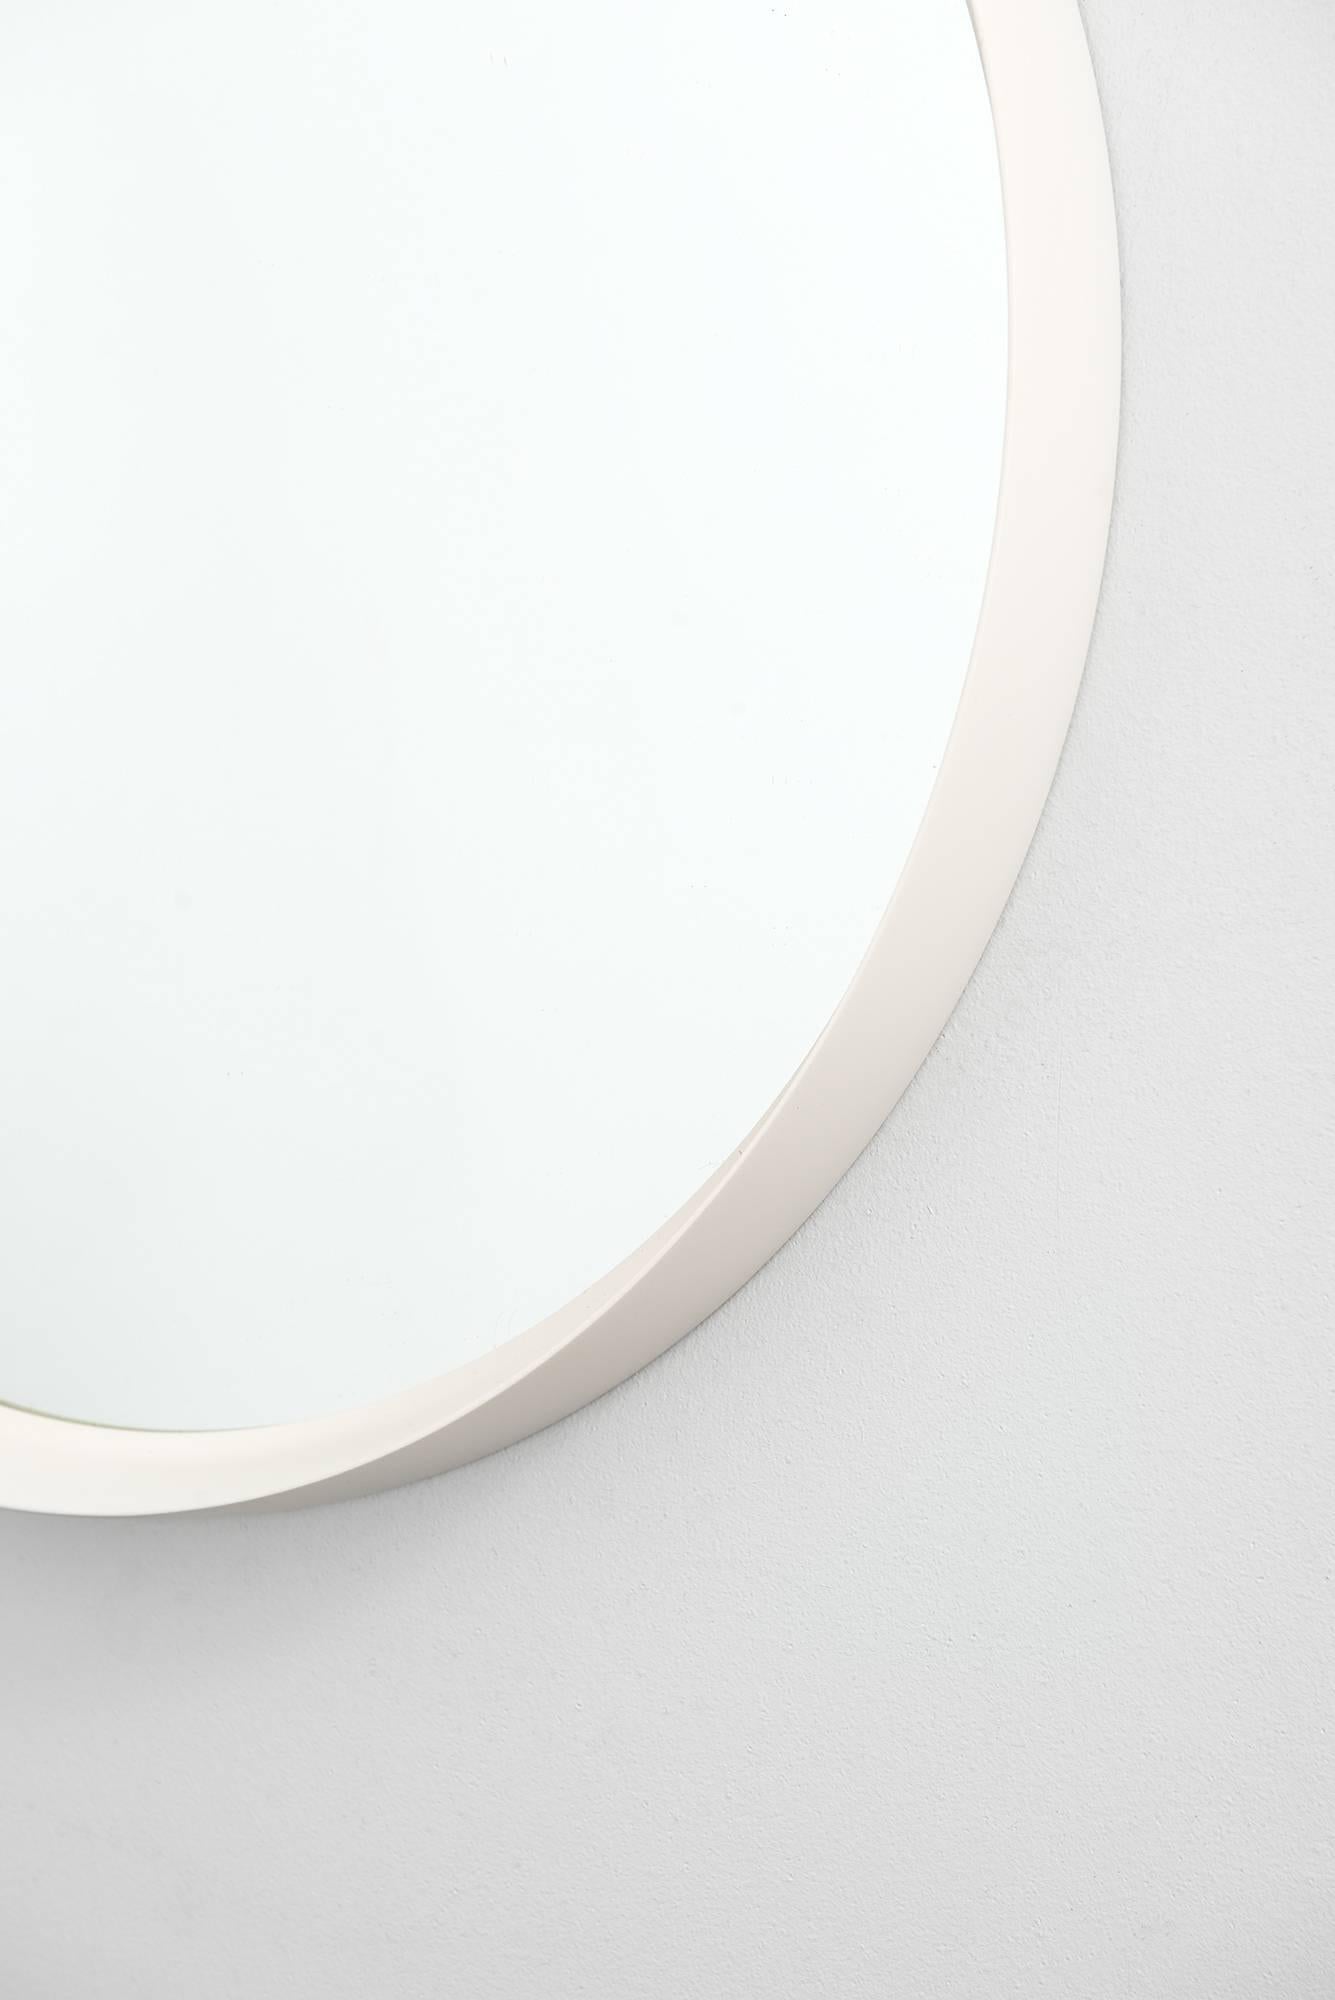 Scandinavian Modern White Lacquered Round Mirror Probably Produced in Sweden